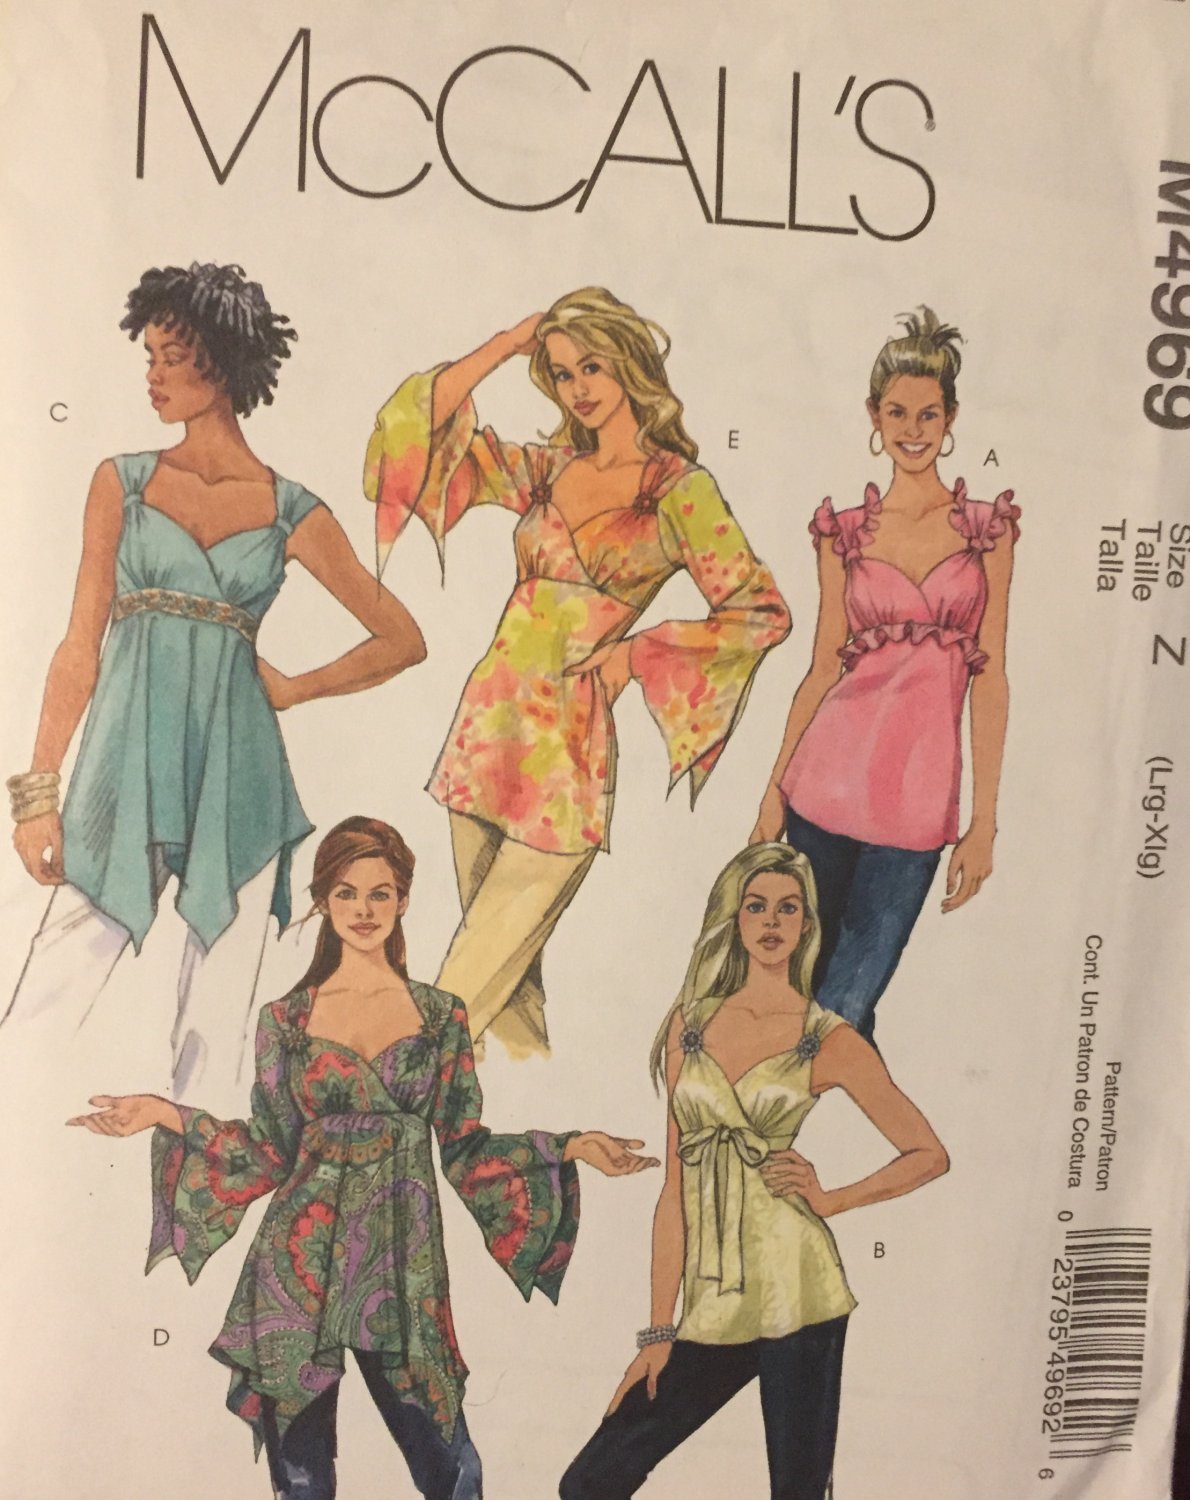 McCall's 4969 Women's sewing pattern: Handkerchief Top in two lengths ...